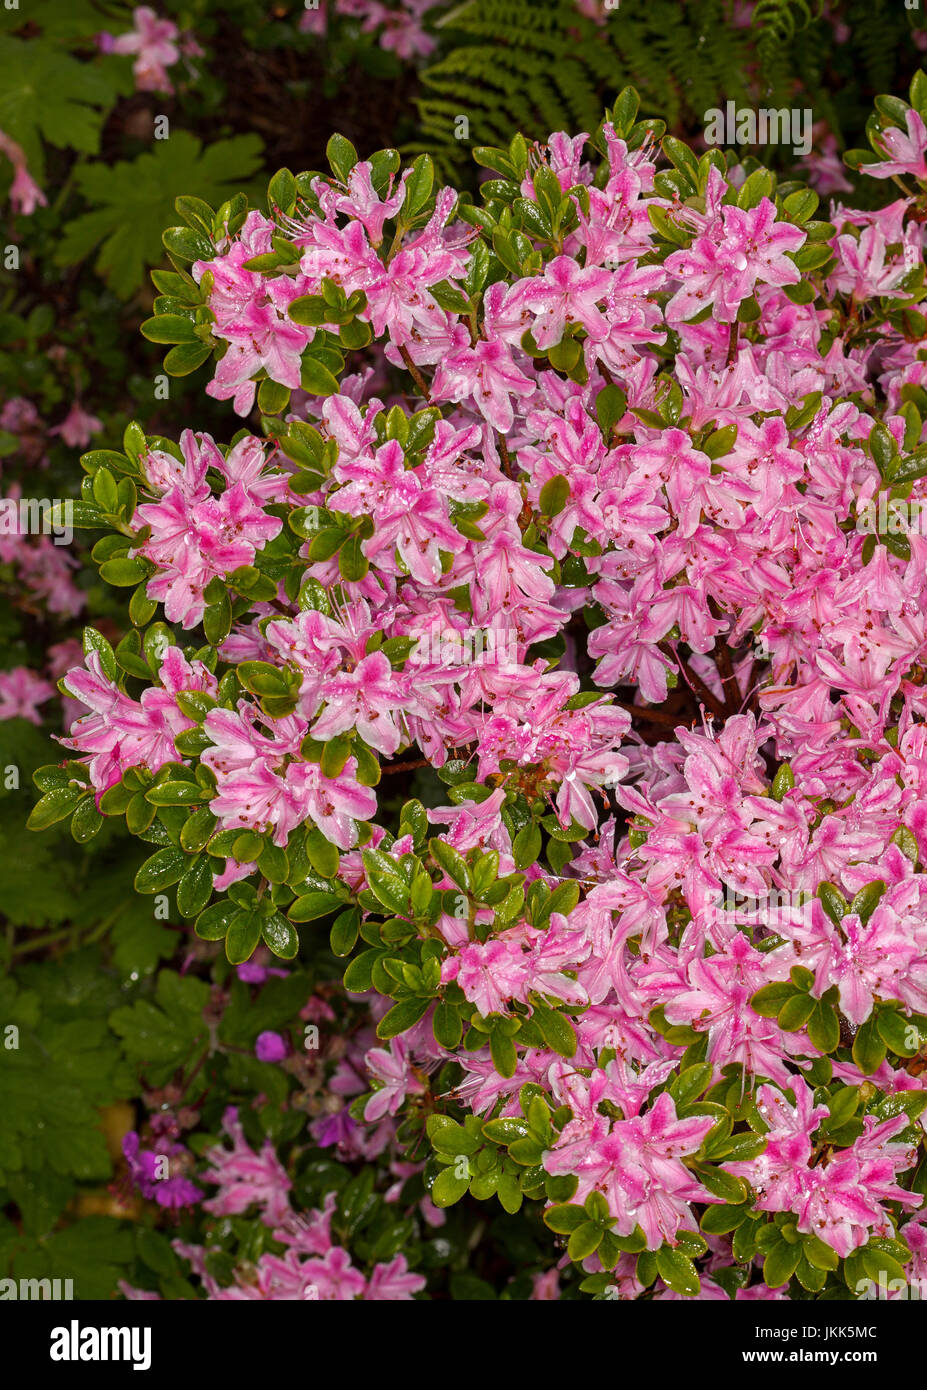 Mass of bright pink flowers of Azalea indica cultivar, with raindrops on petals and surrounded by green leaves Stock Photo